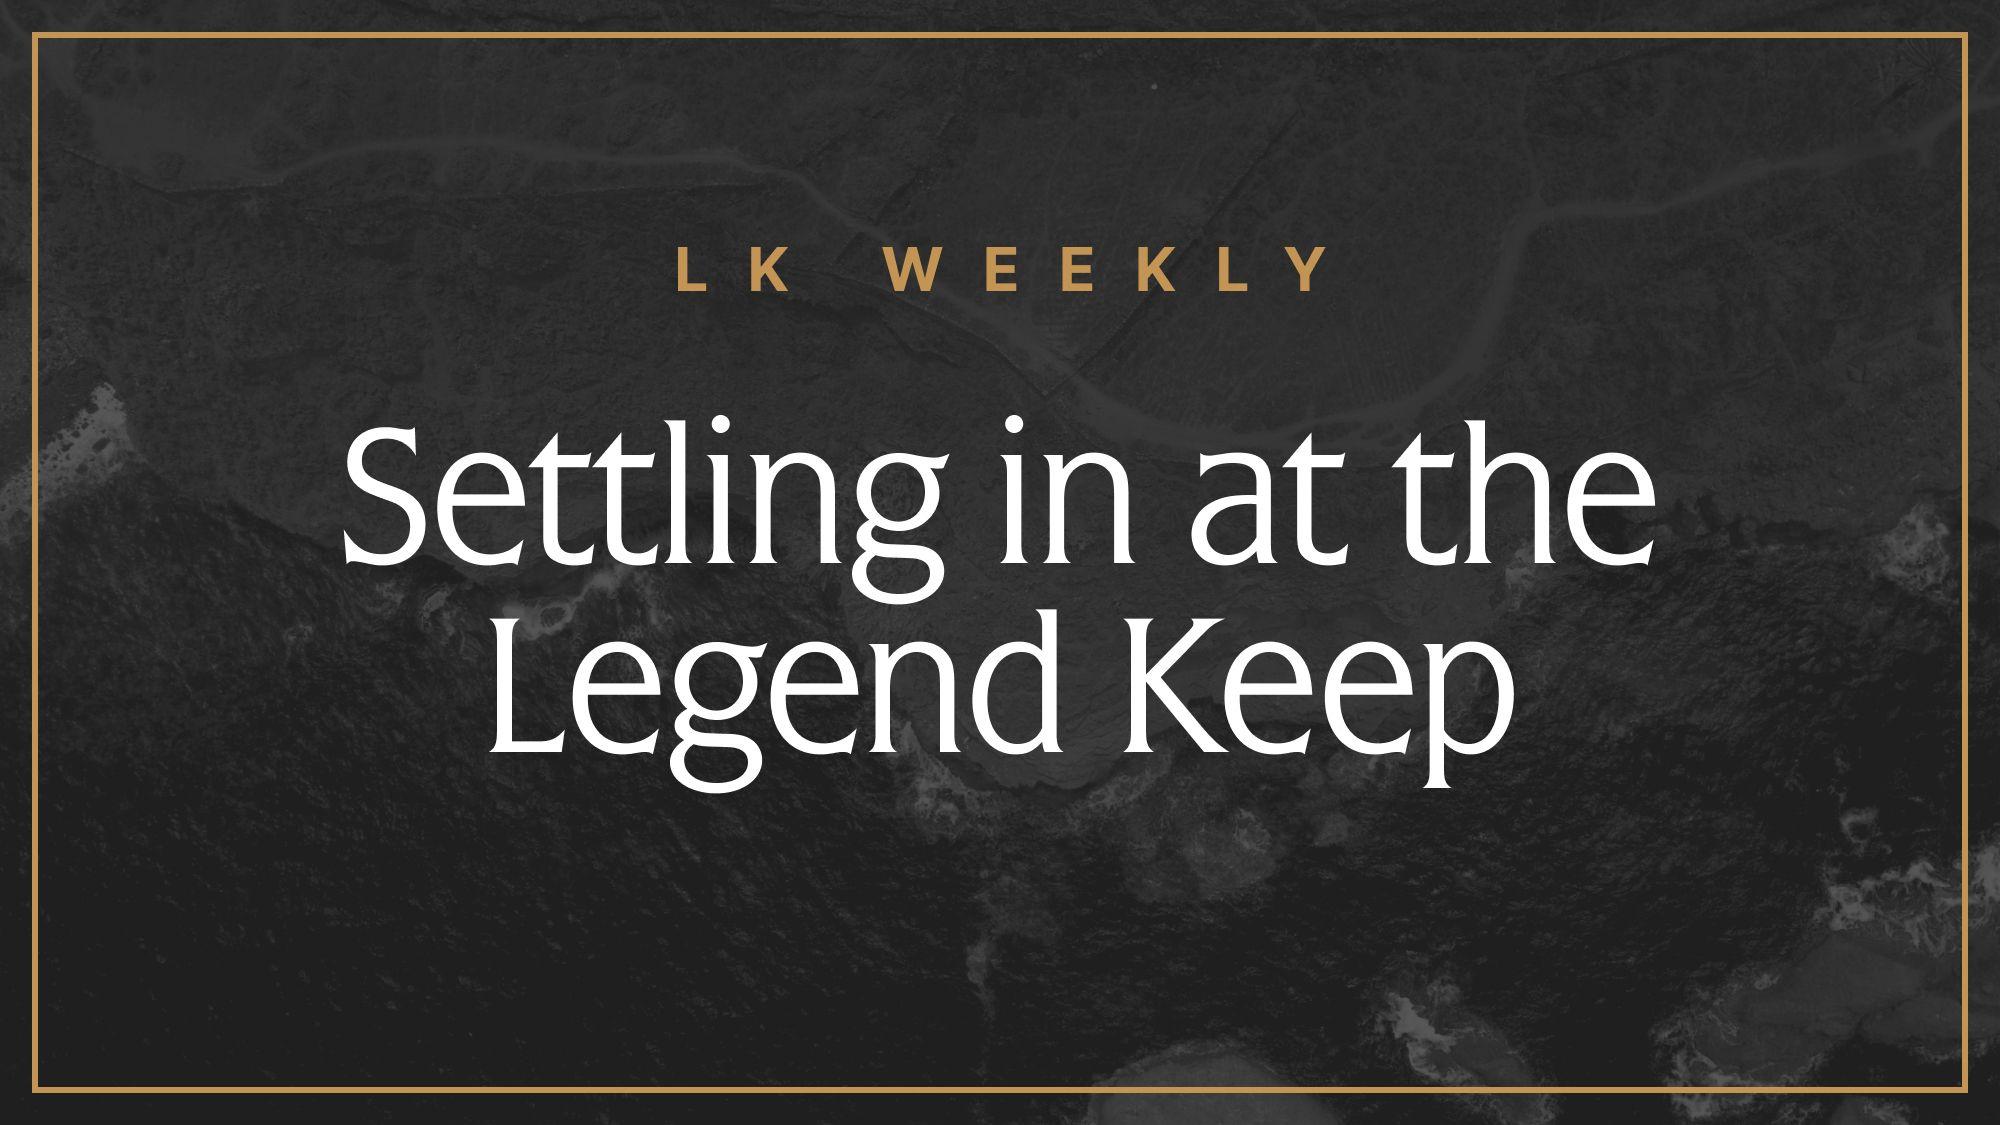 LK Weekly: Settling in at the Legend Keep